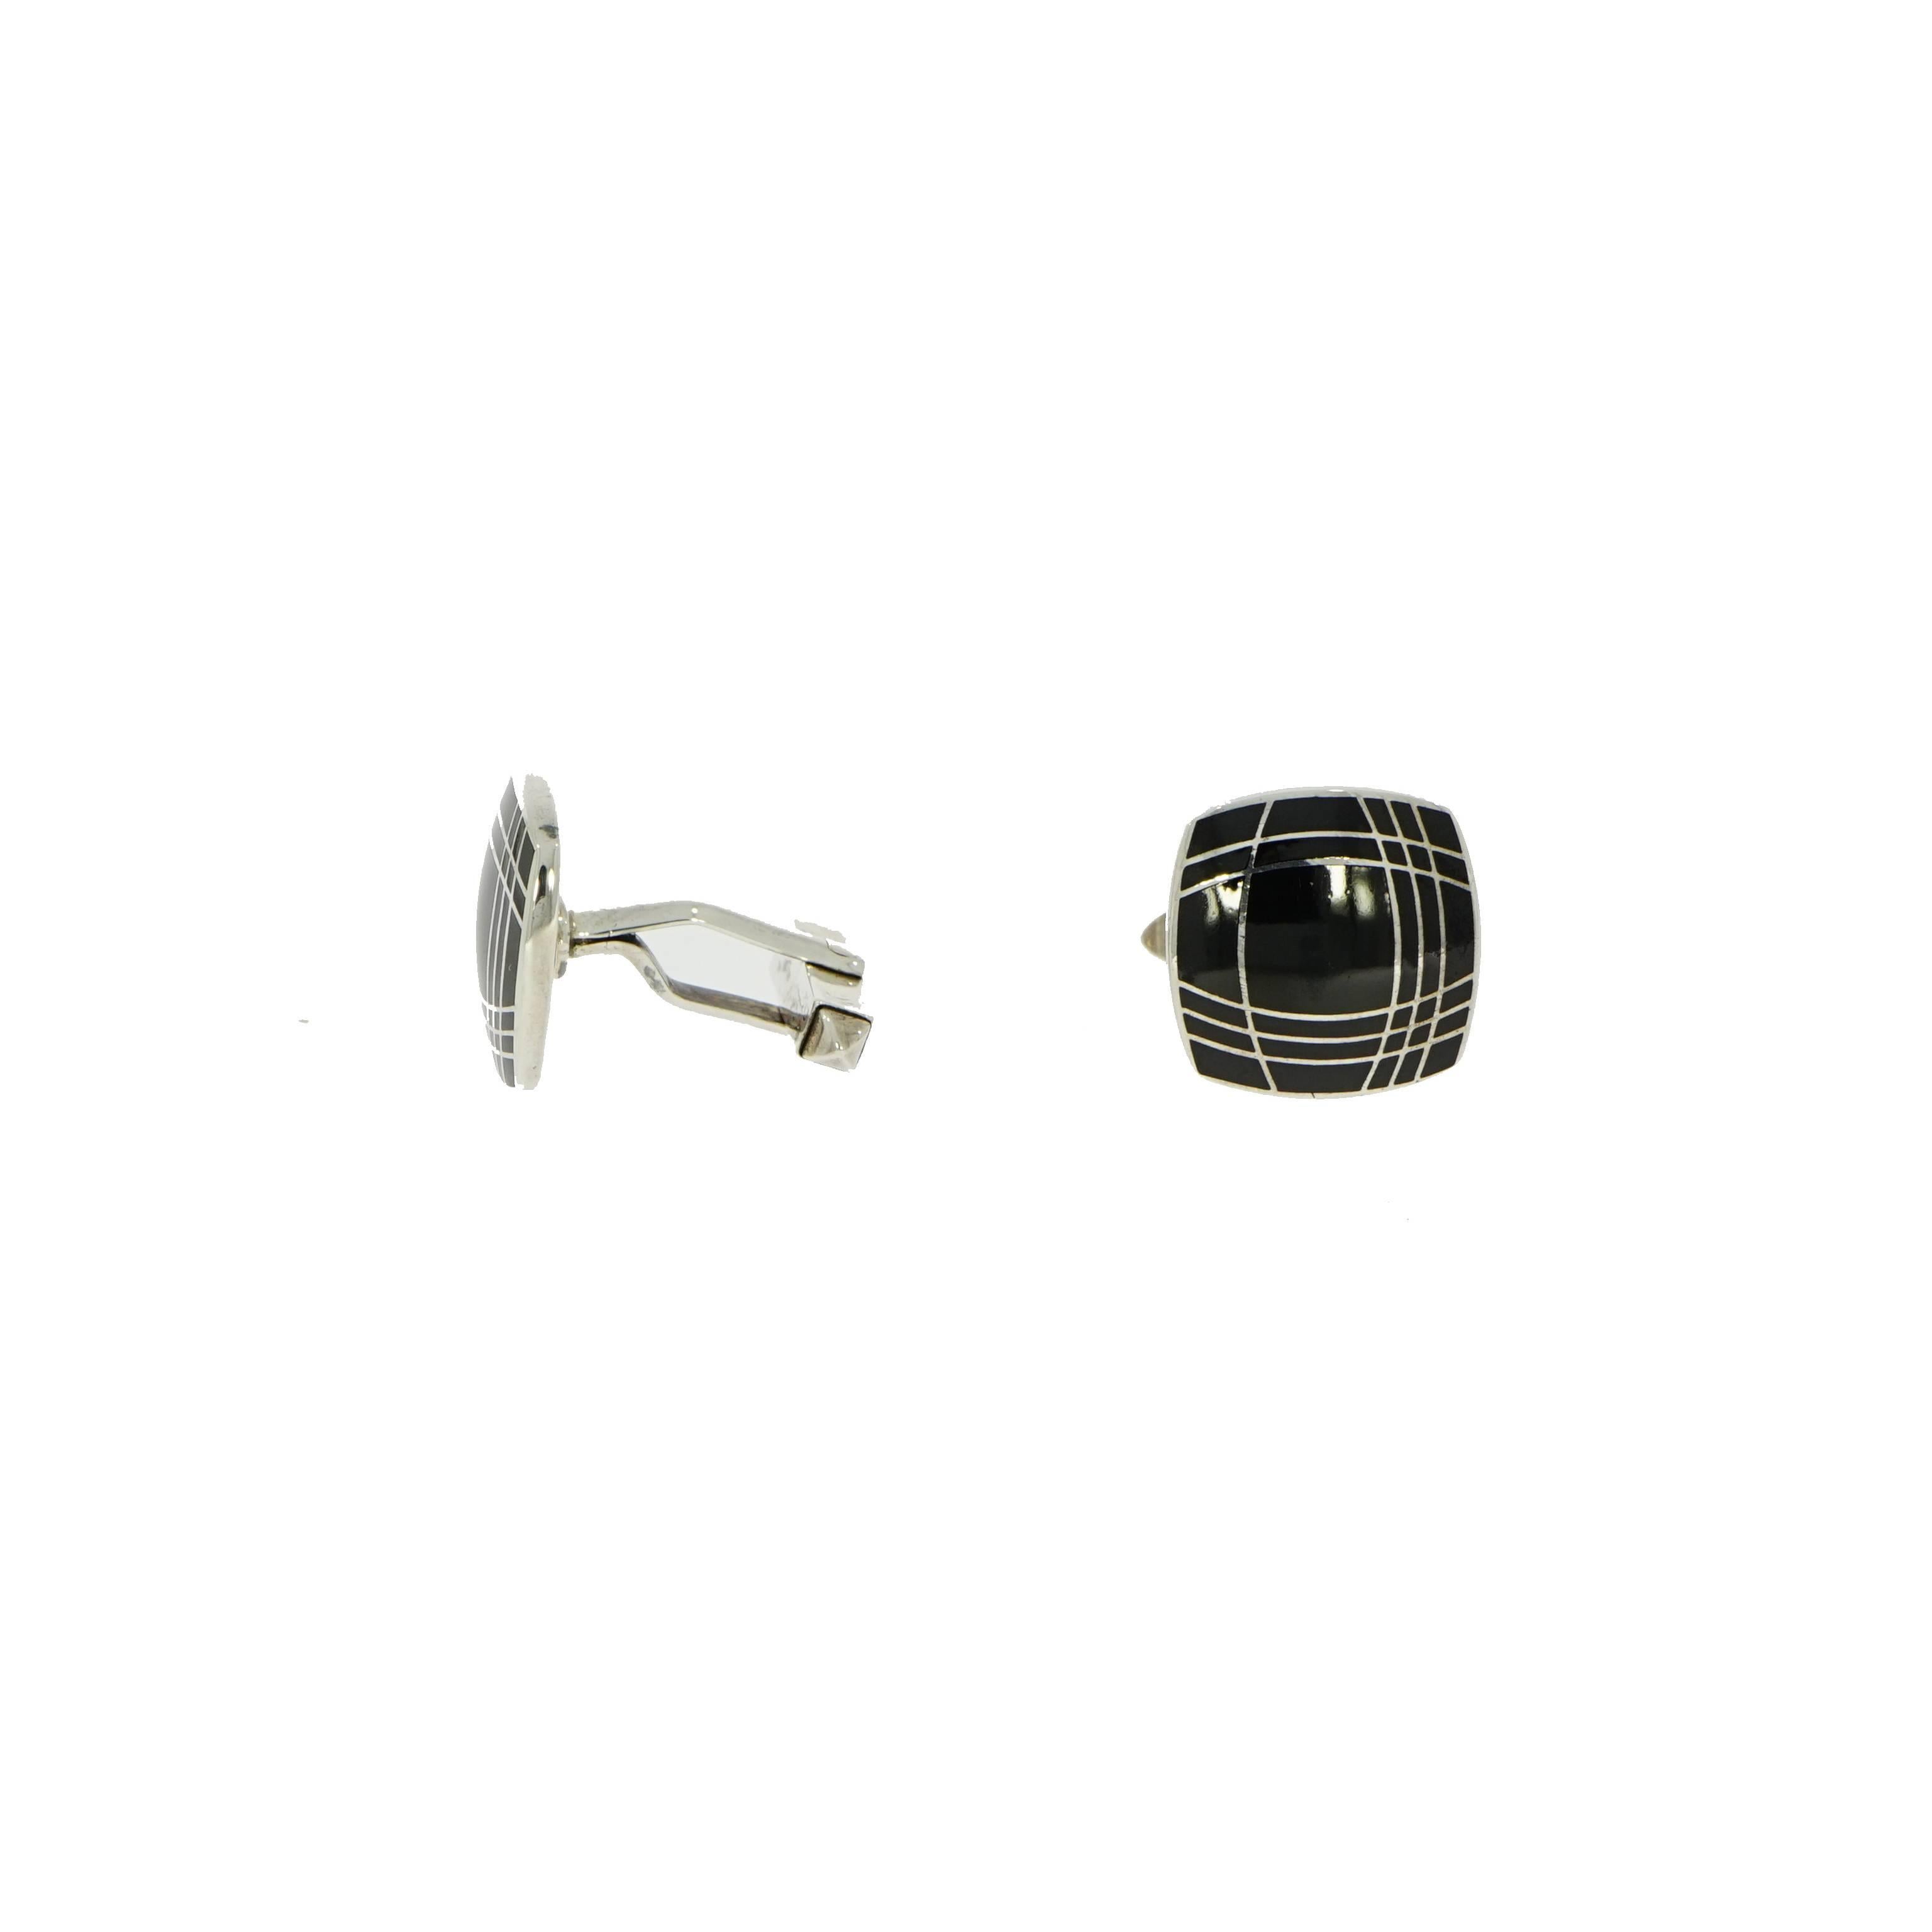 Cufflinks can be worn anytime by anyone and will transmit your style and define your look. 
This stylish and modern black enamel cushion shaped (squared with rounded corners) cufflinks is handcrafted in sterling silver and highlighted with geometric